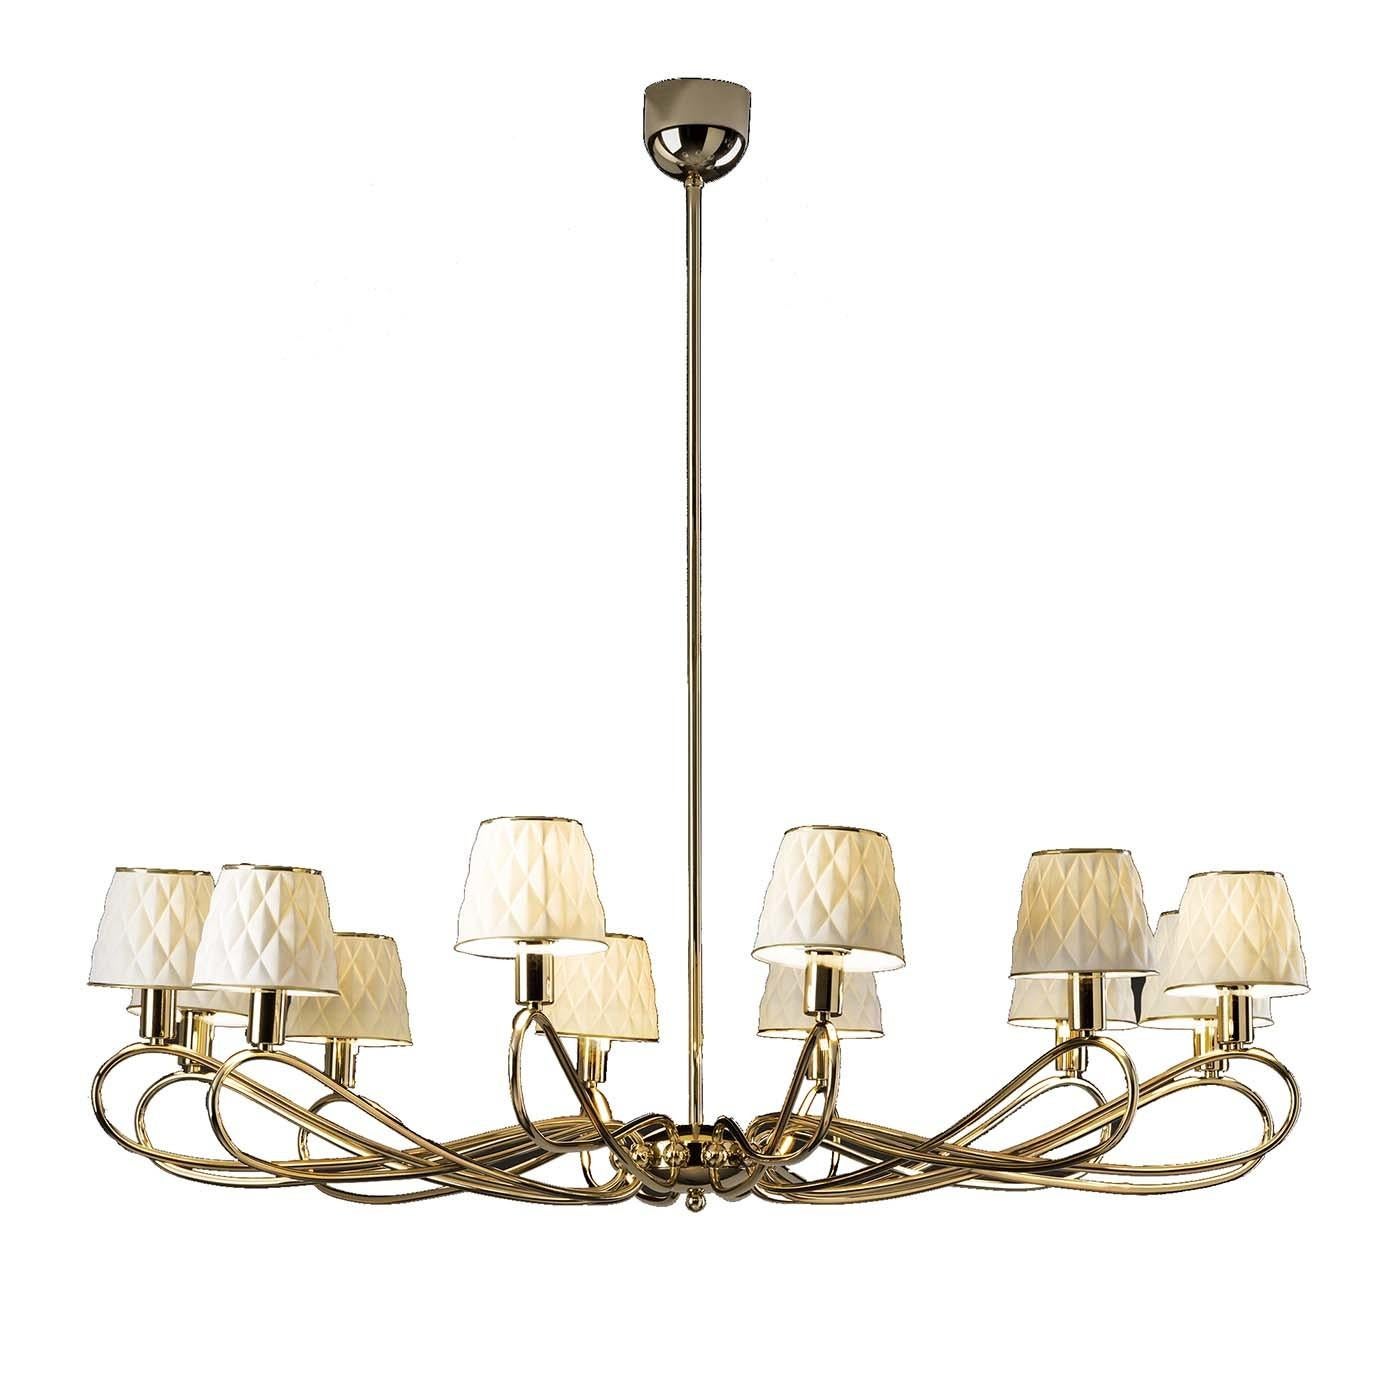 This splendid chandelier conveys an elegant sense of movement with its fascinating design. Hanging from a straight brass frame, twelve sinuous metal arms with an antiqued gold finish sustain as many lampshades. The diffusers are in prized matte